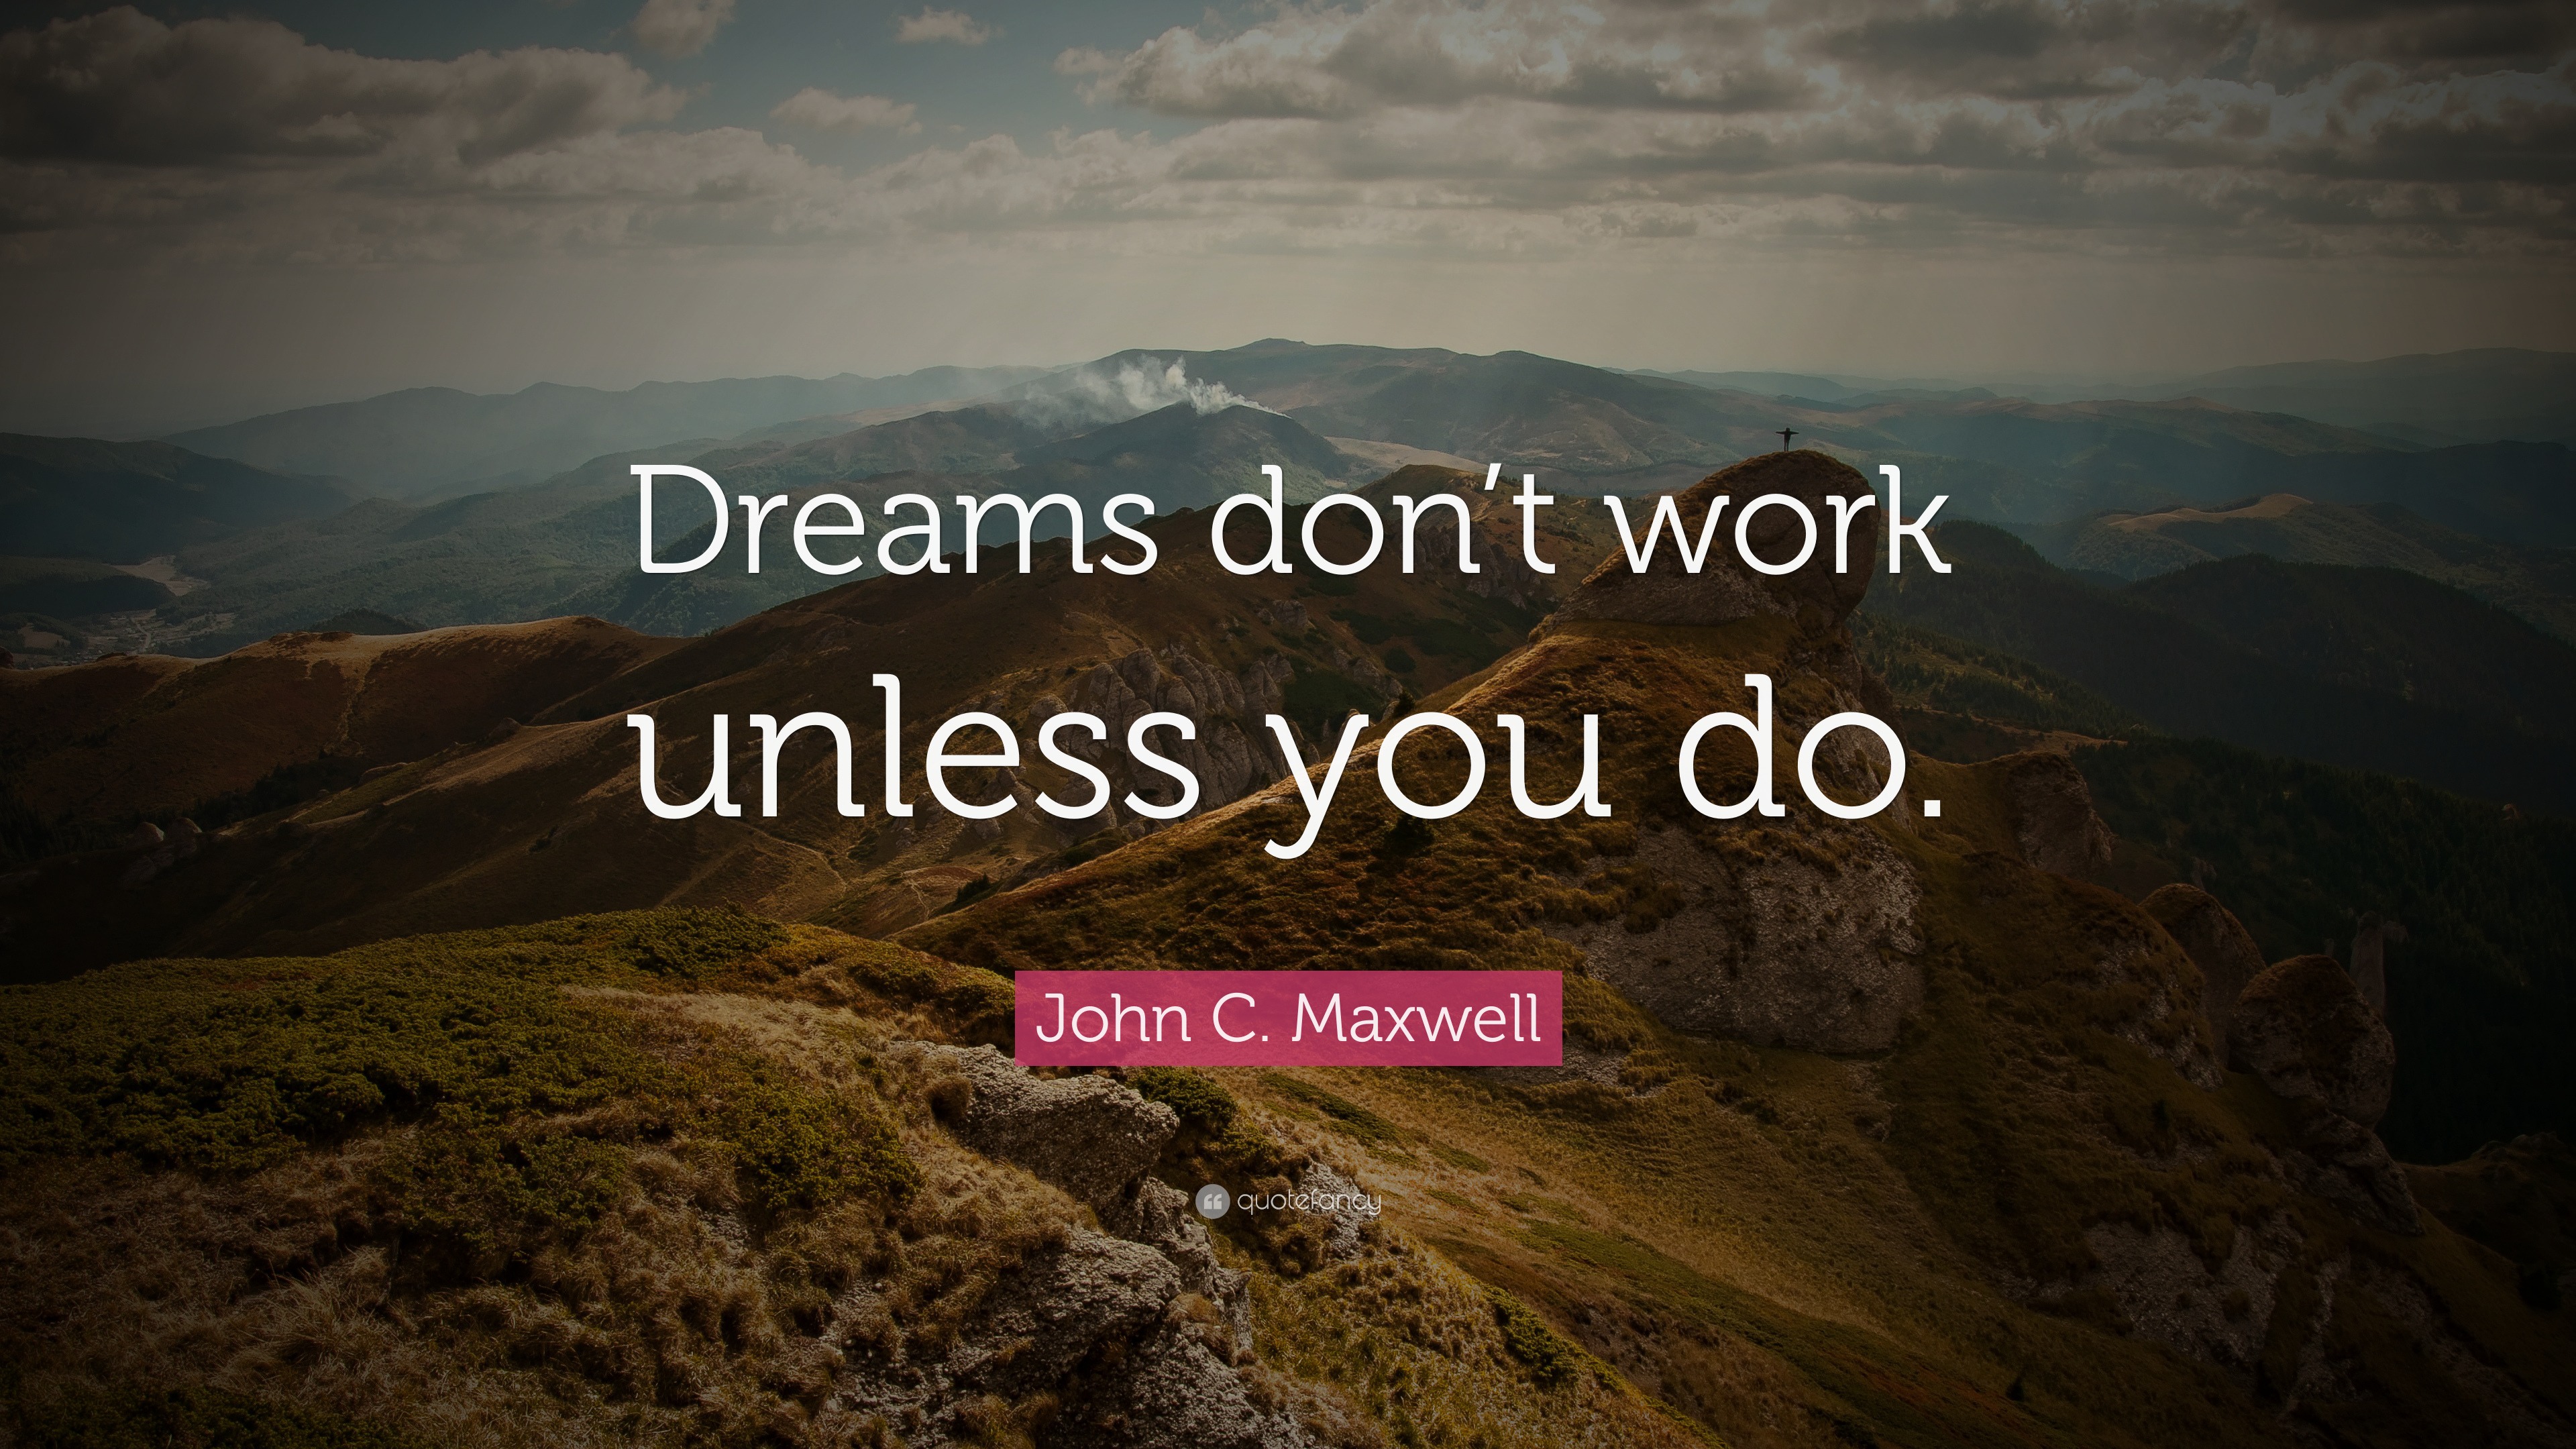 John C. Maxwell Quote: “Dreams don’t work unless you do.”